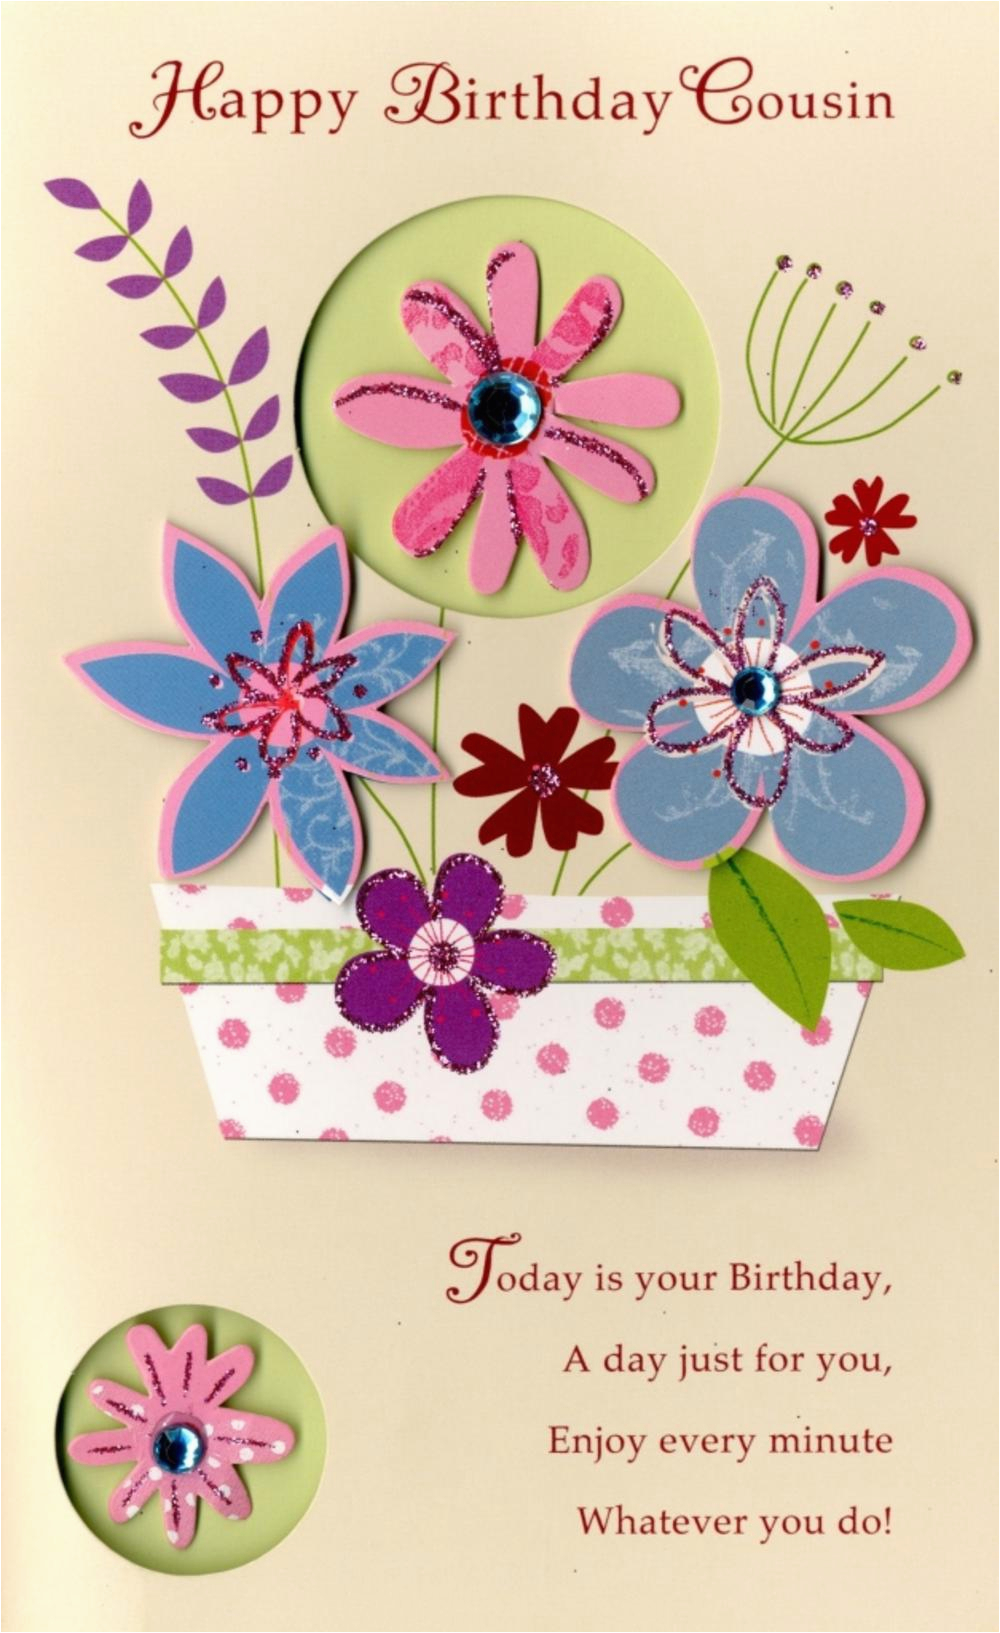 kcsnpc201 happy birthday cousin embellished greeting card second nature poem corner cards